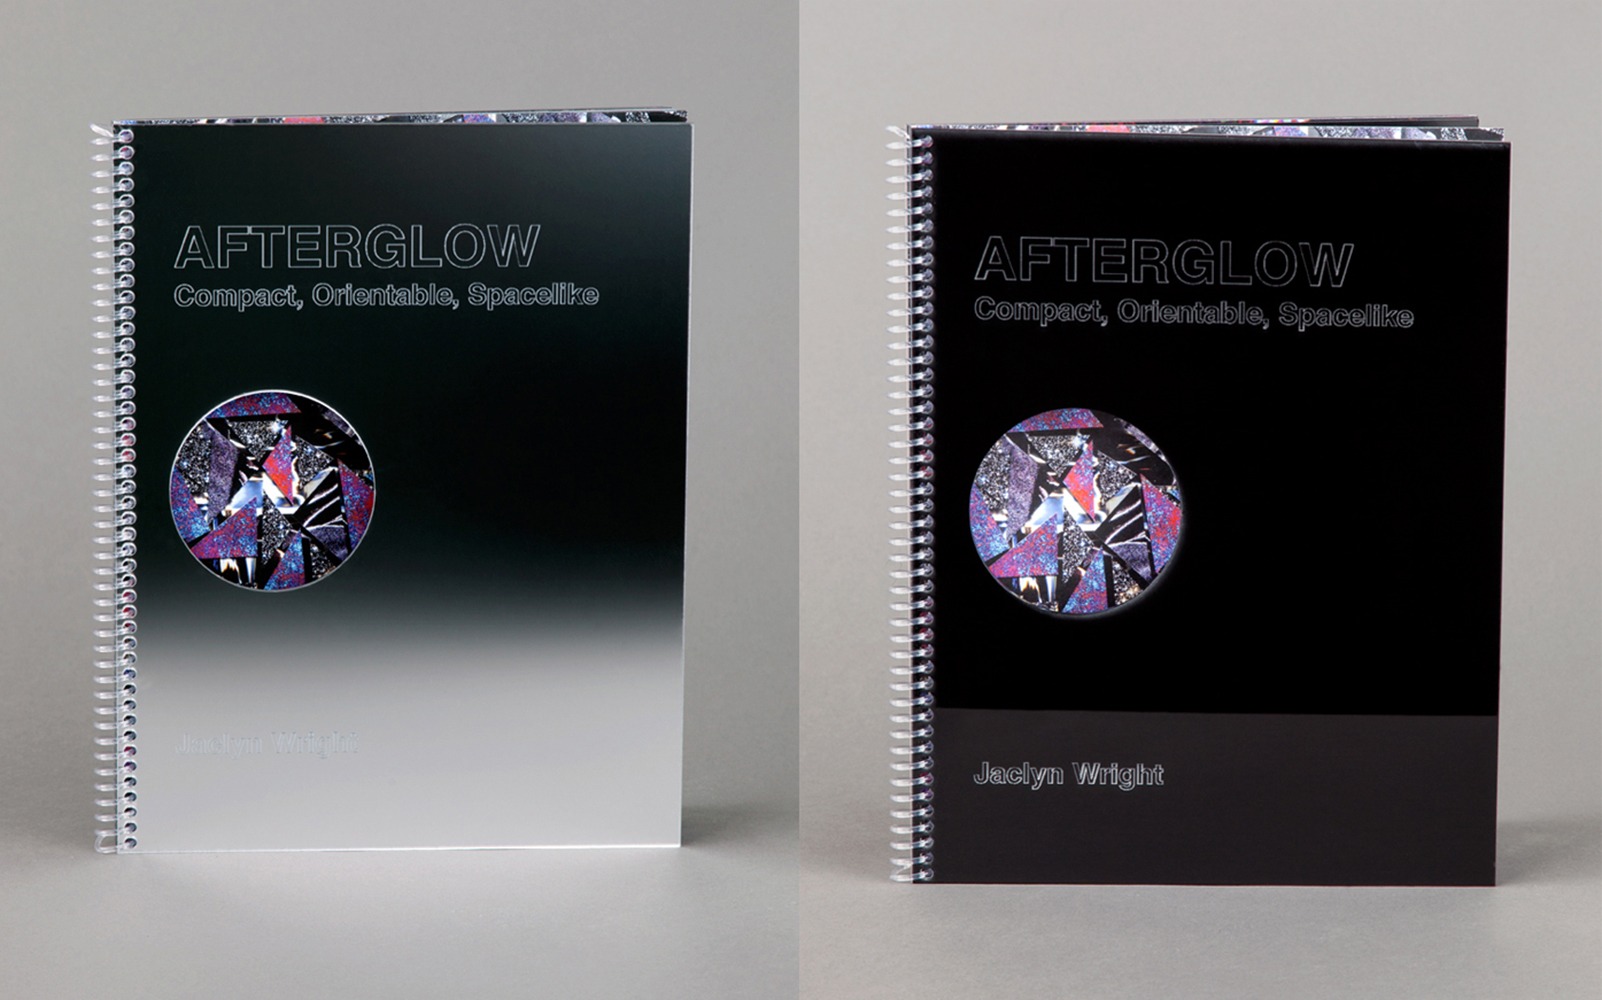 Afterglow covers